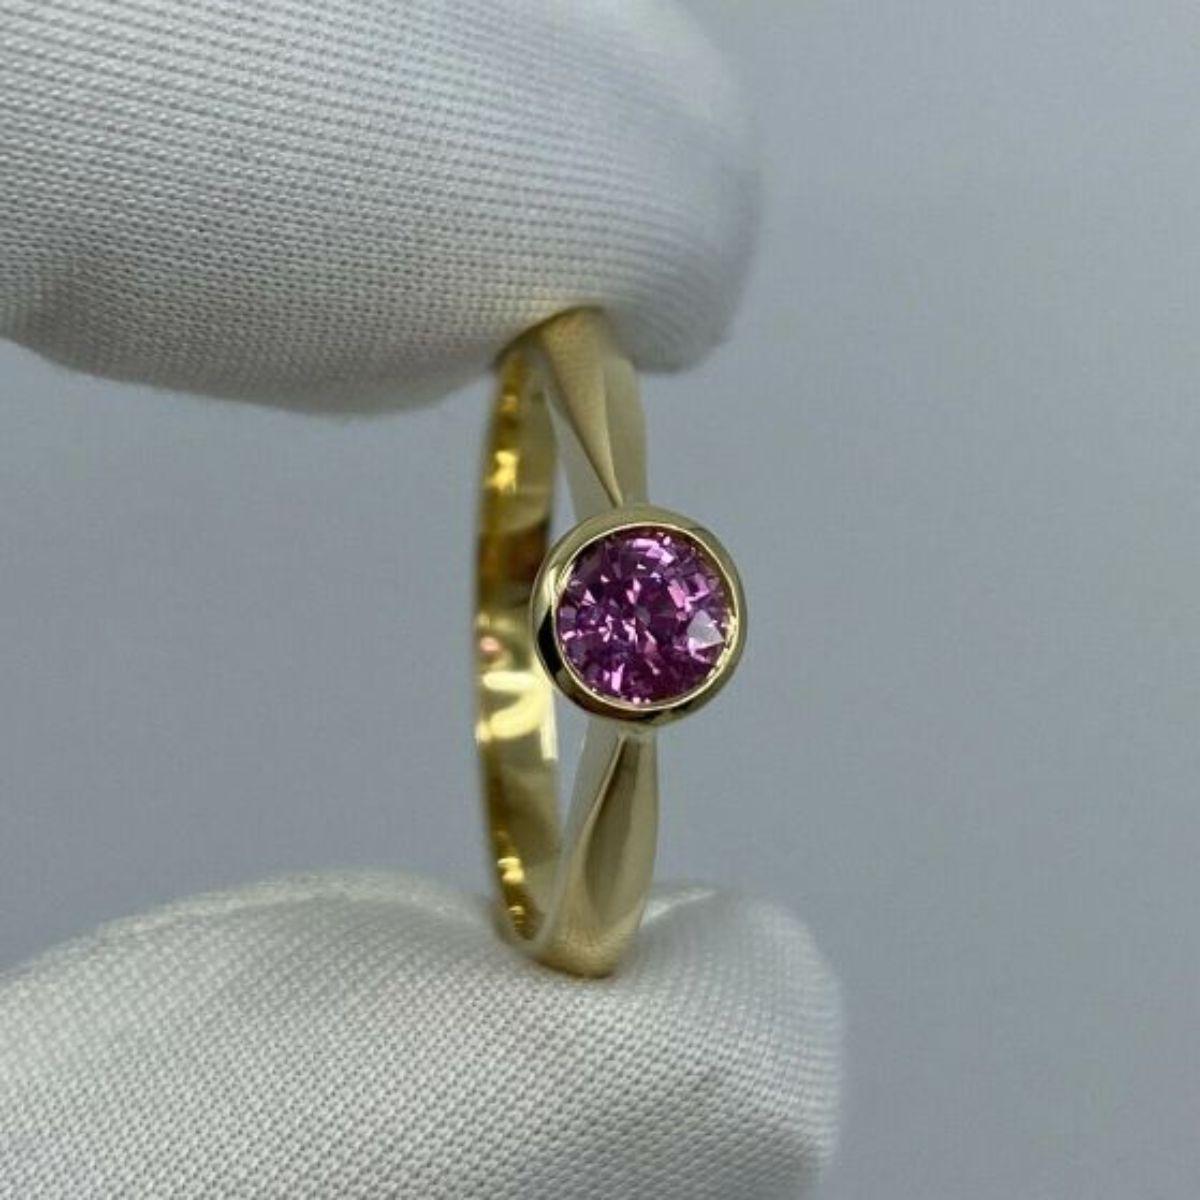 Fine Vivid Pink Sapphire Round Cut 18K Yellow Gold Solitaire Rubover Bezel Ring

Fine Natural Vivid Pink Sapphire 18K Yellow Gold Solitaire Ring. 
0.53 Carat stone with a stunning vivid pink colour and excellent clarity. Very clean stone. Also has